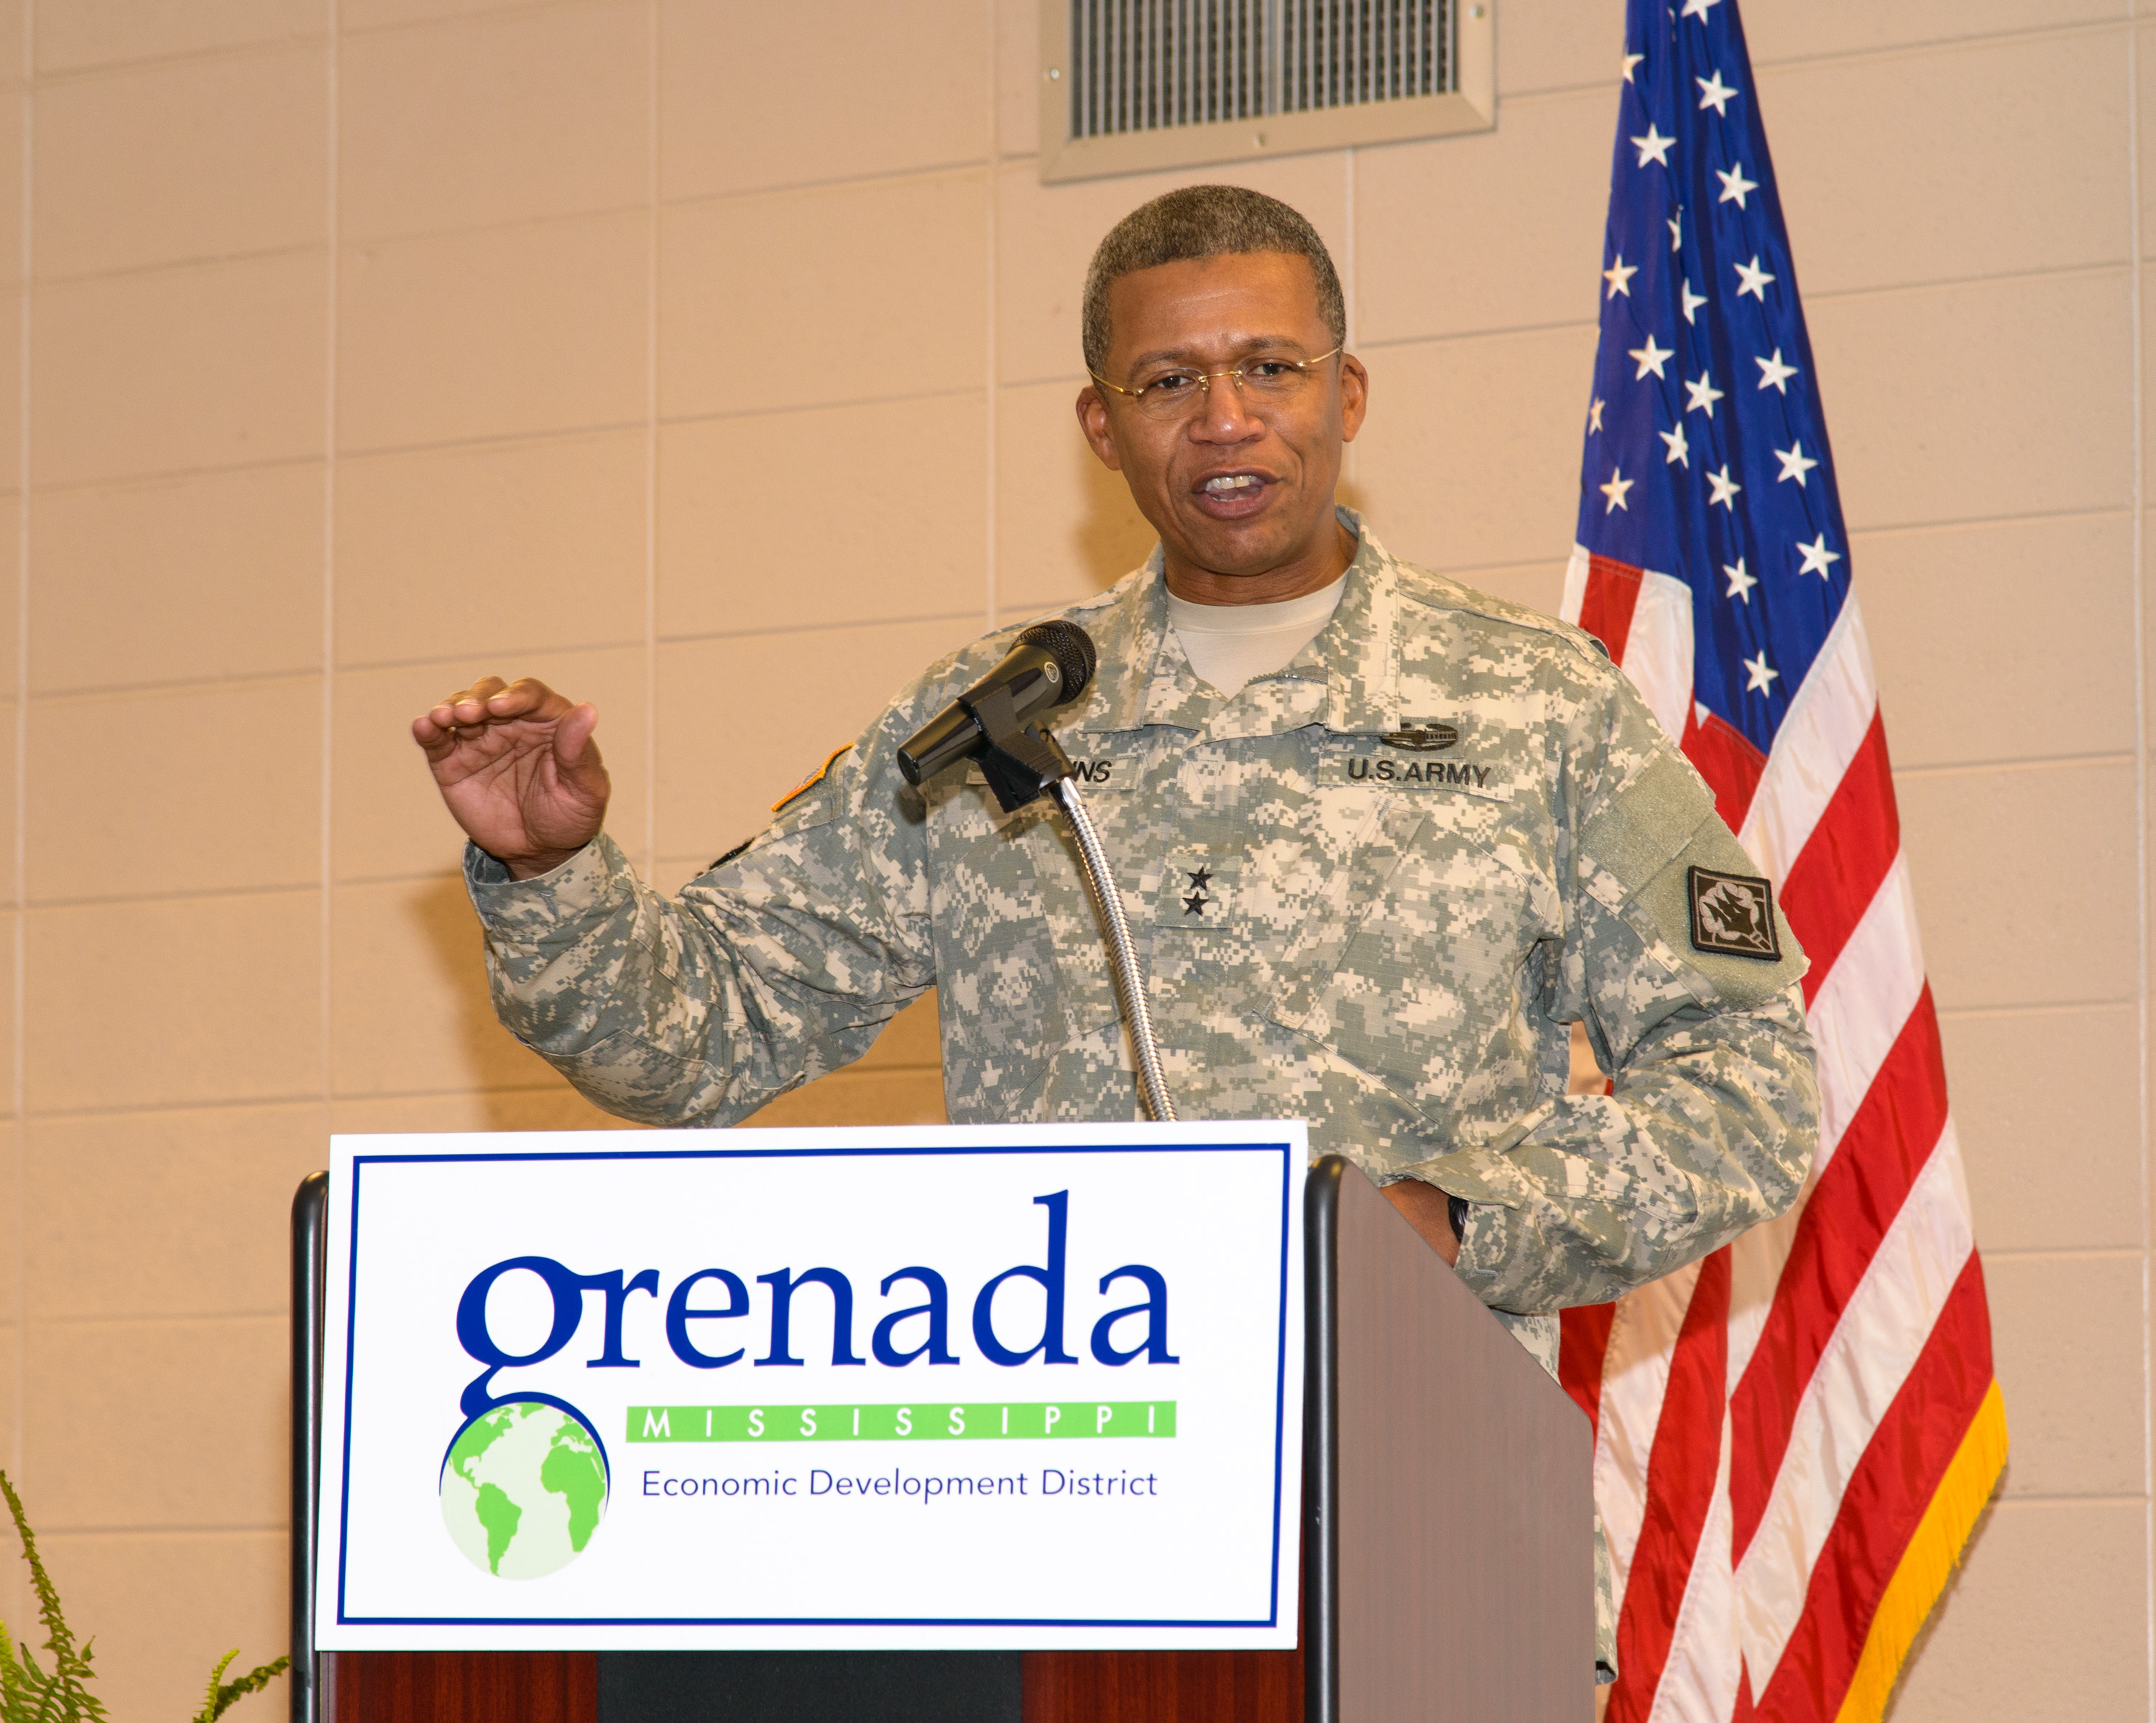 Adjutant General of the State of Mississippi, Major General Augustus Collins speaks to over 130 people at the Grenada EDD 4th Annual Meeting.